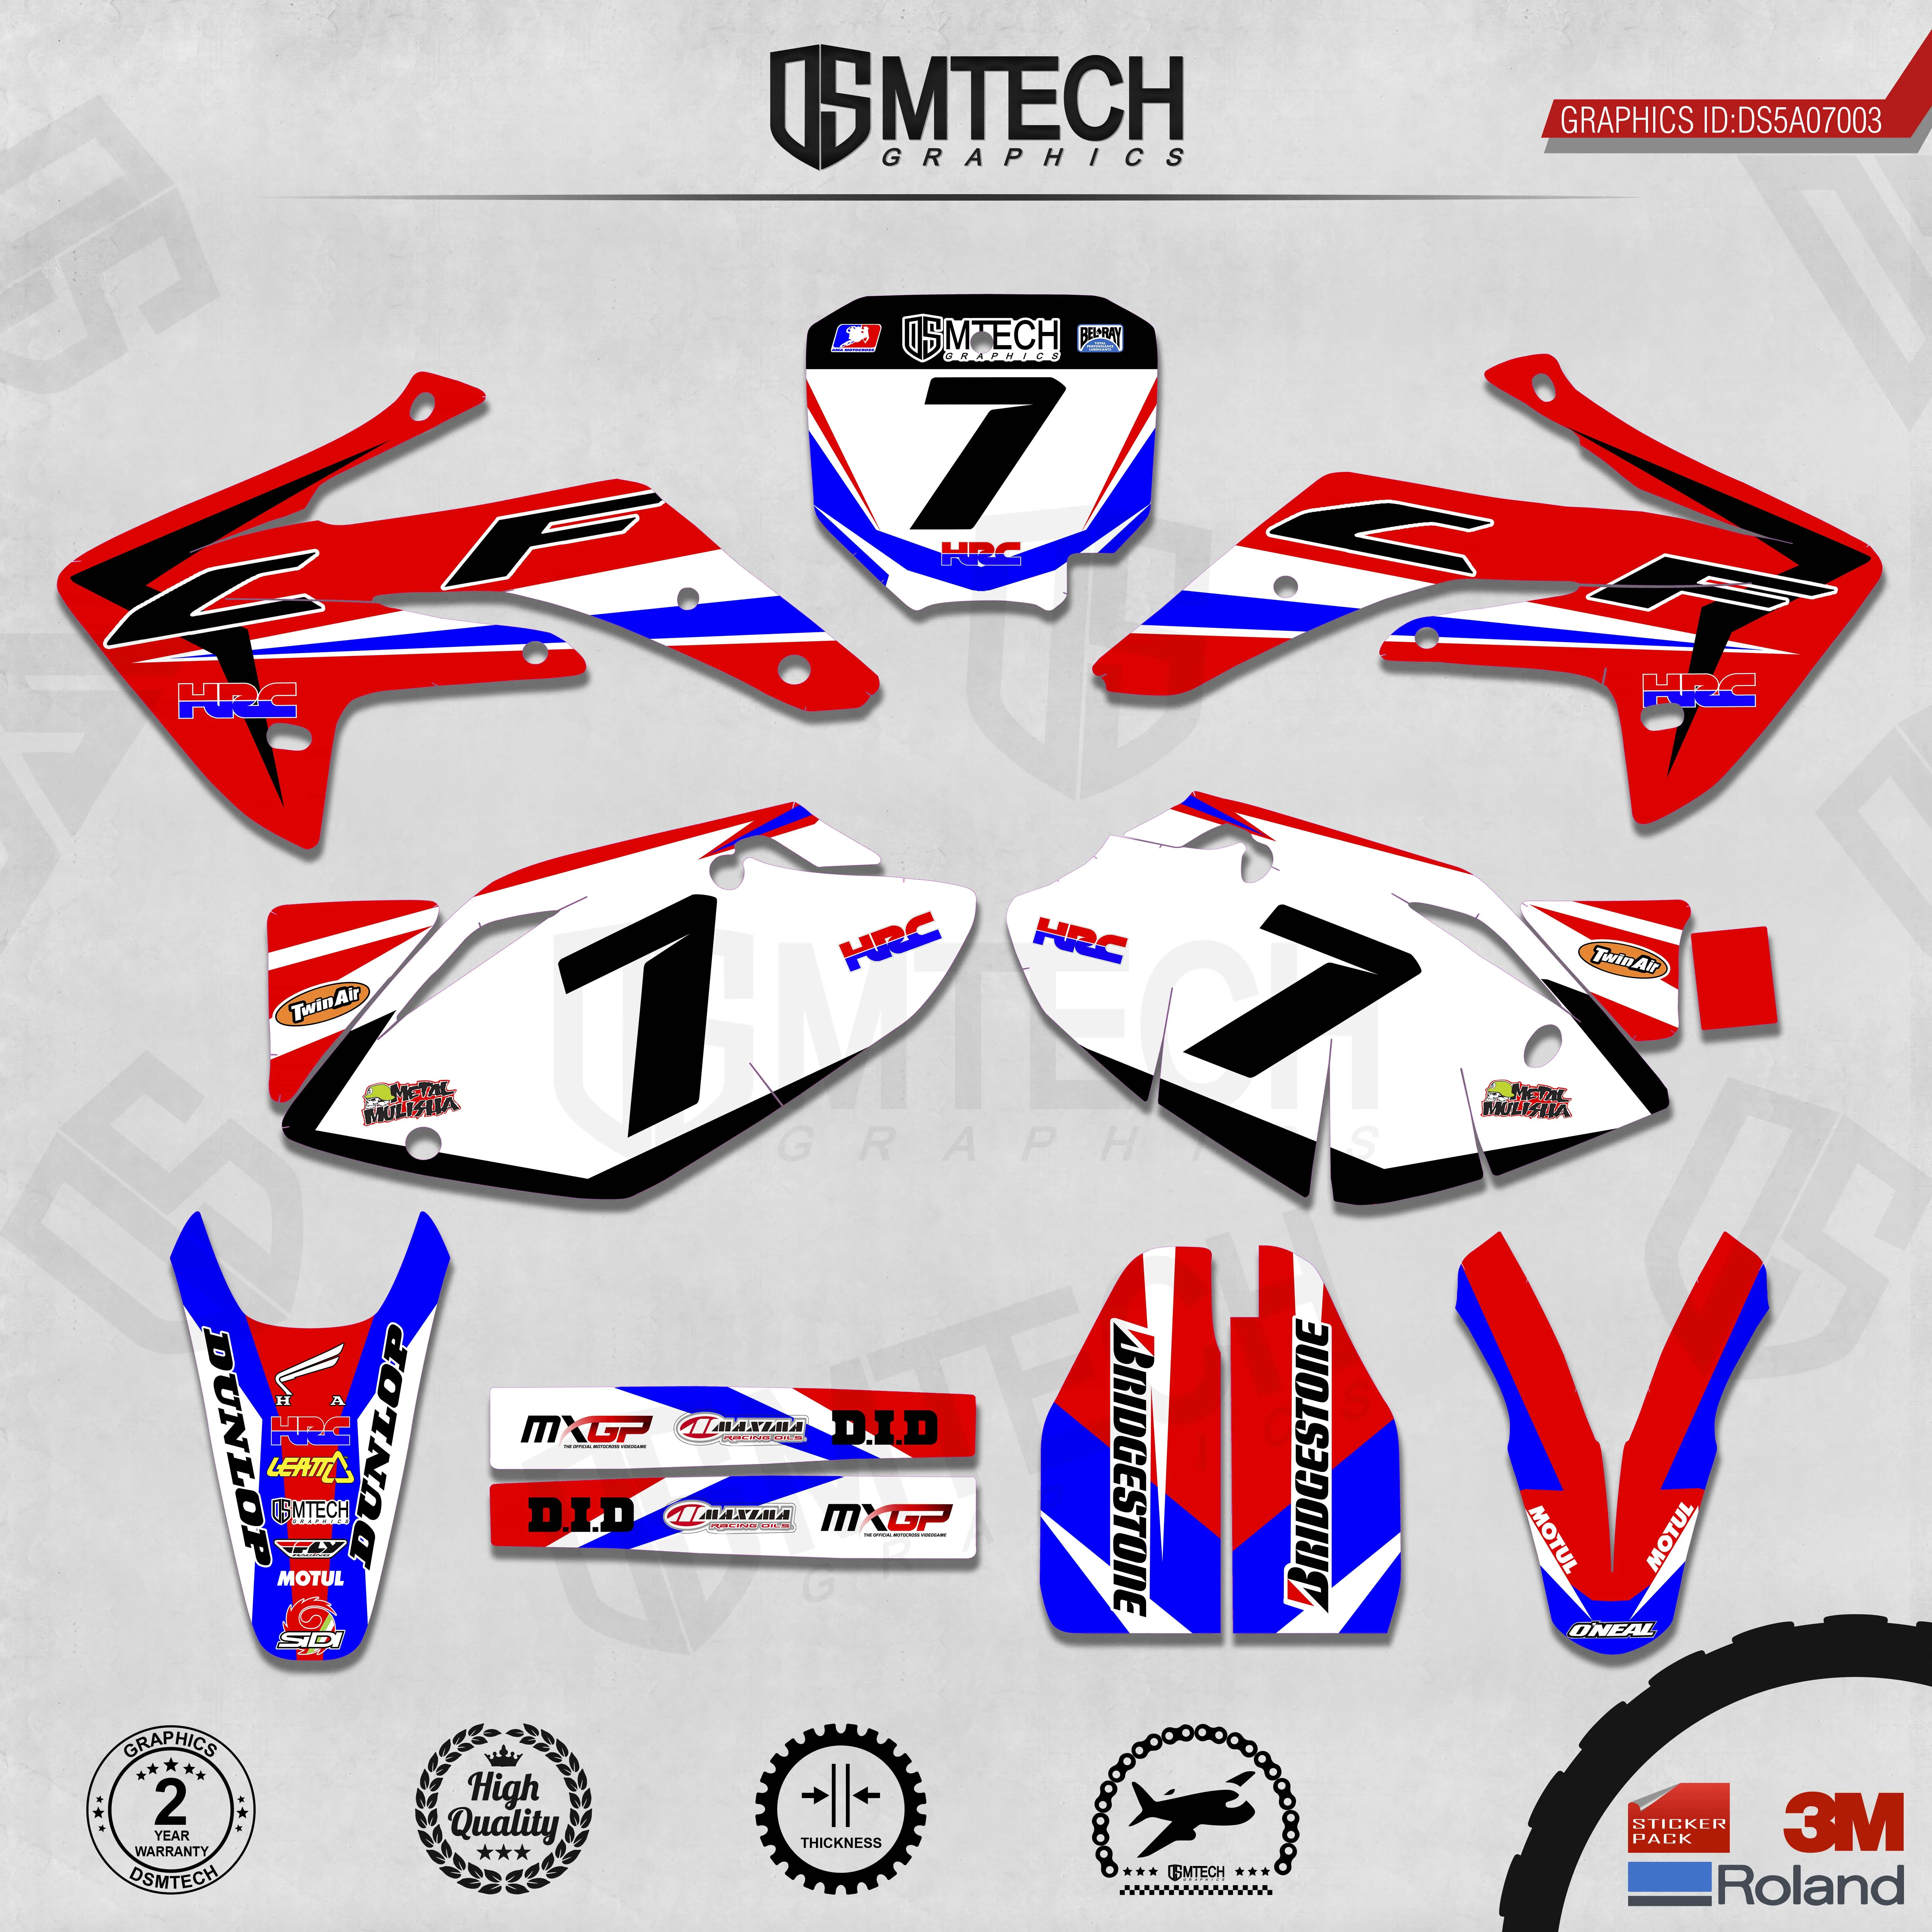 DSMTECH Customized Team Graphics Backgrounds Decals 3M Custom Stickers For 2007-2009 2010-2012 2013-2015 2016-2020 CRF150R 003